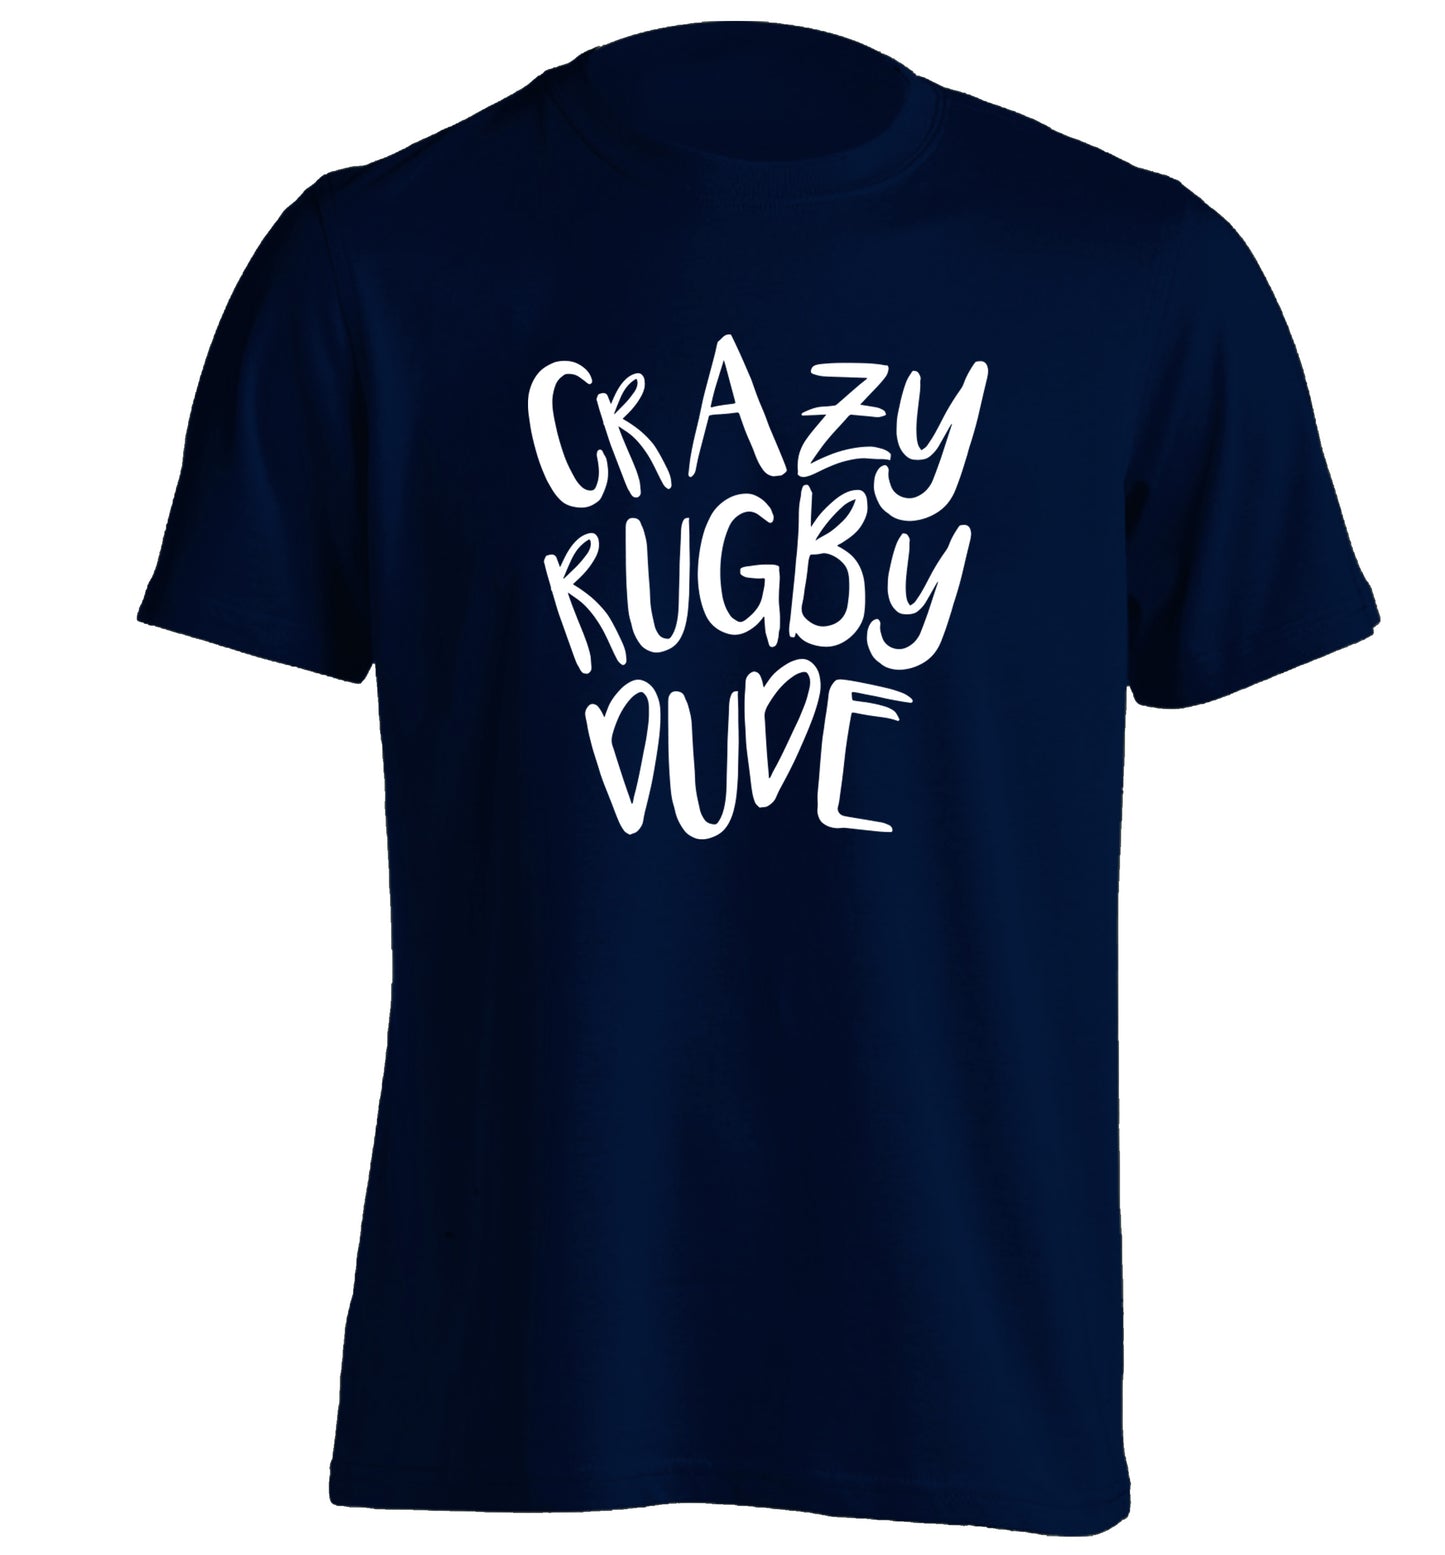 Crazy rugby dude adults unisex navy Tshirt 2XL